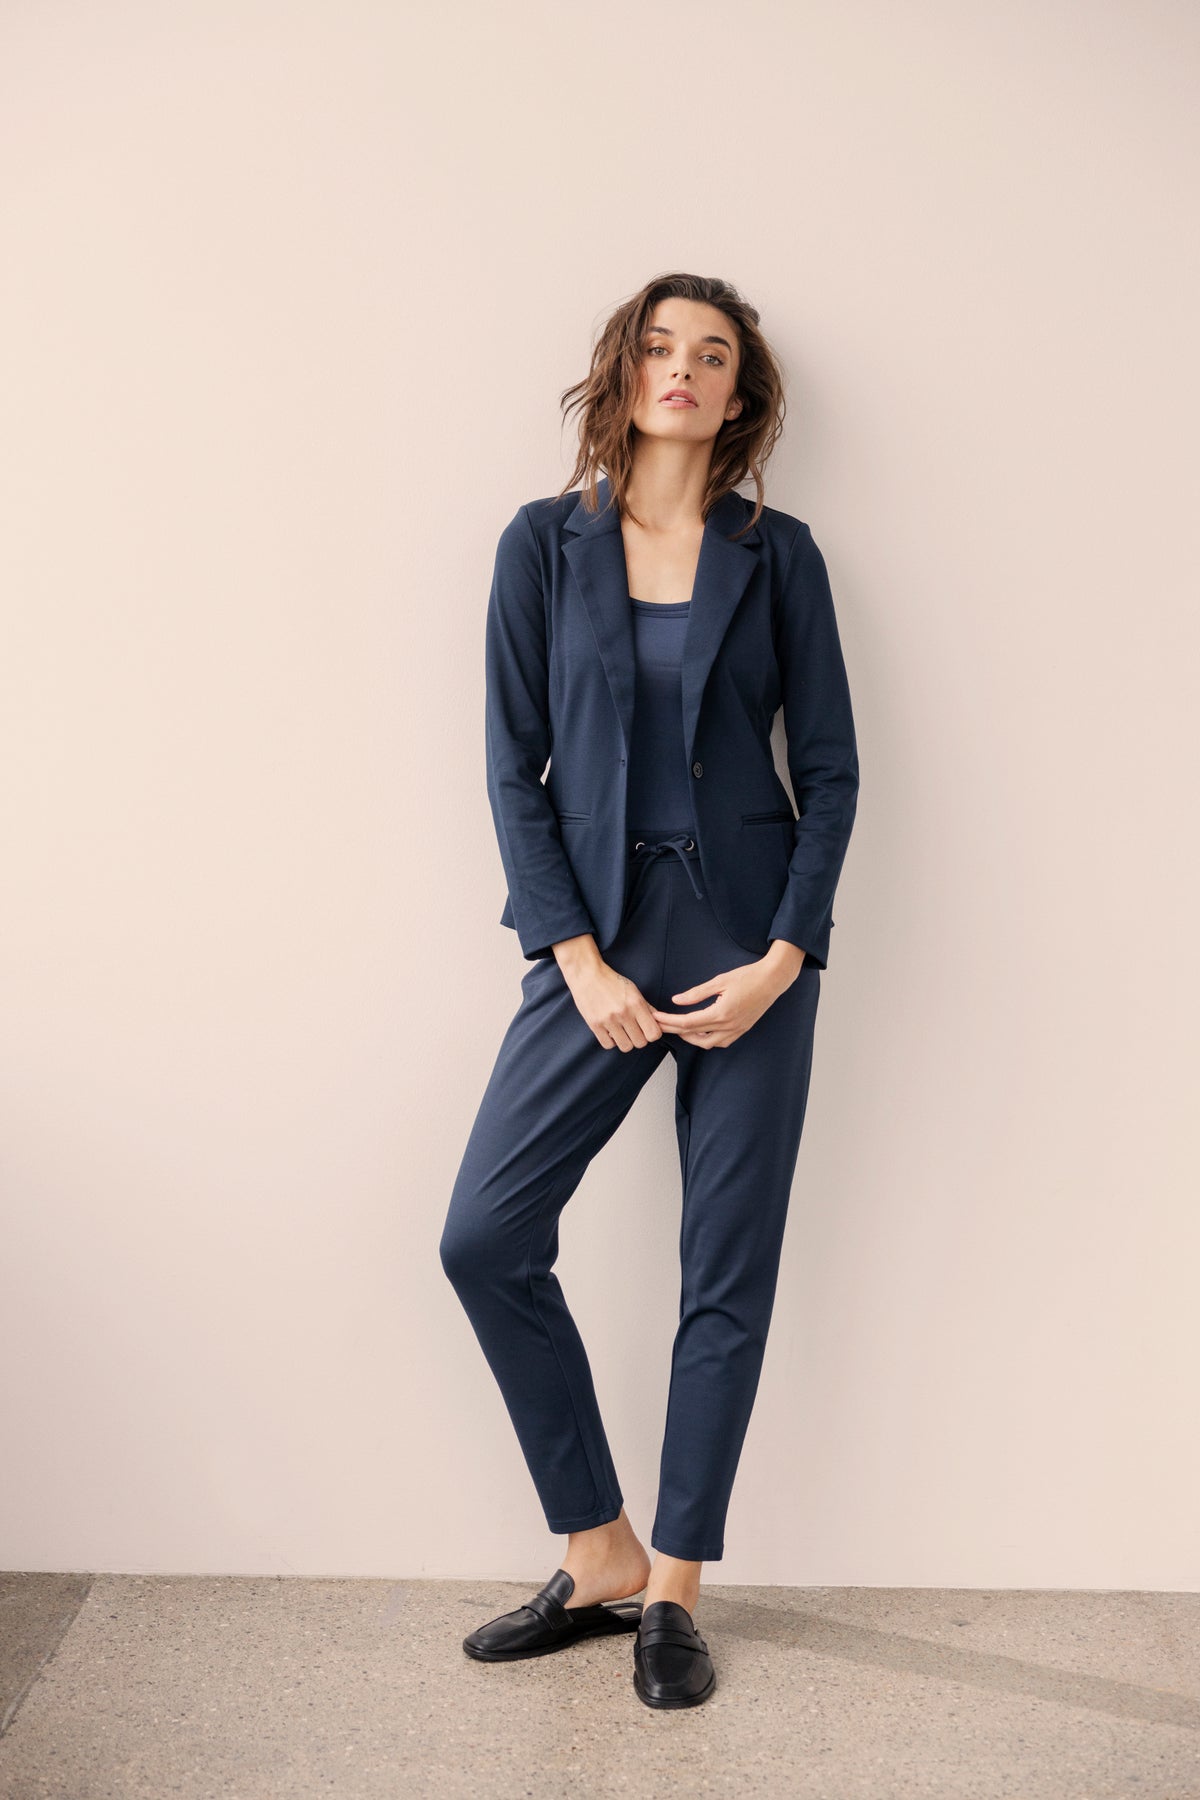 The Luna Pant in Navy